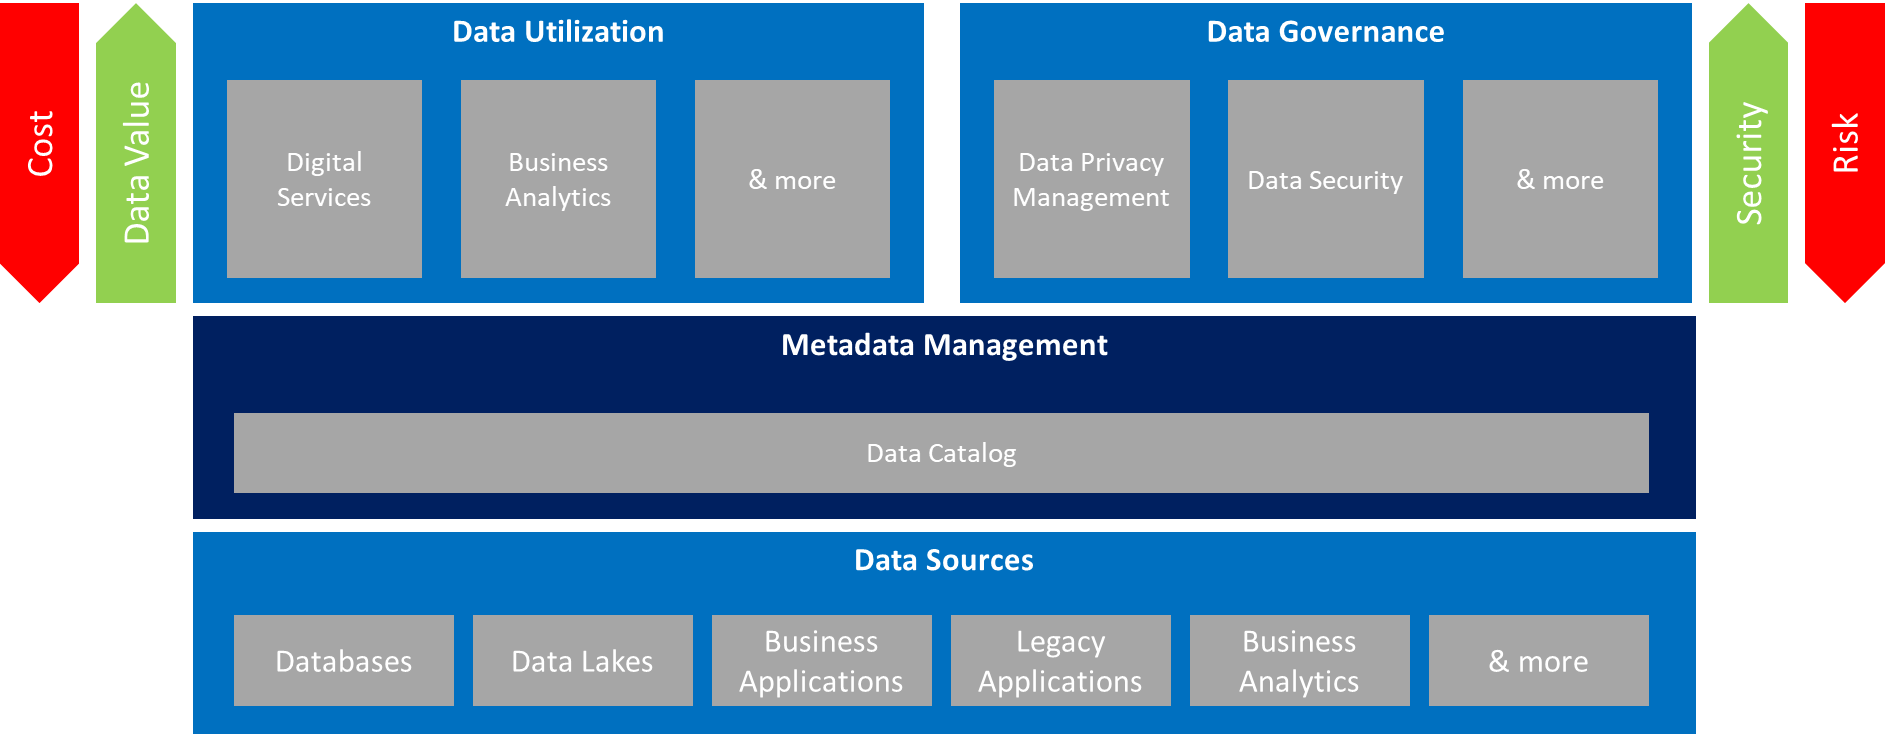  Metadata Management and Data Catalogs simplify the use of data for both utilization and governance purposes, reducing risk and cost while increasing data value and security.